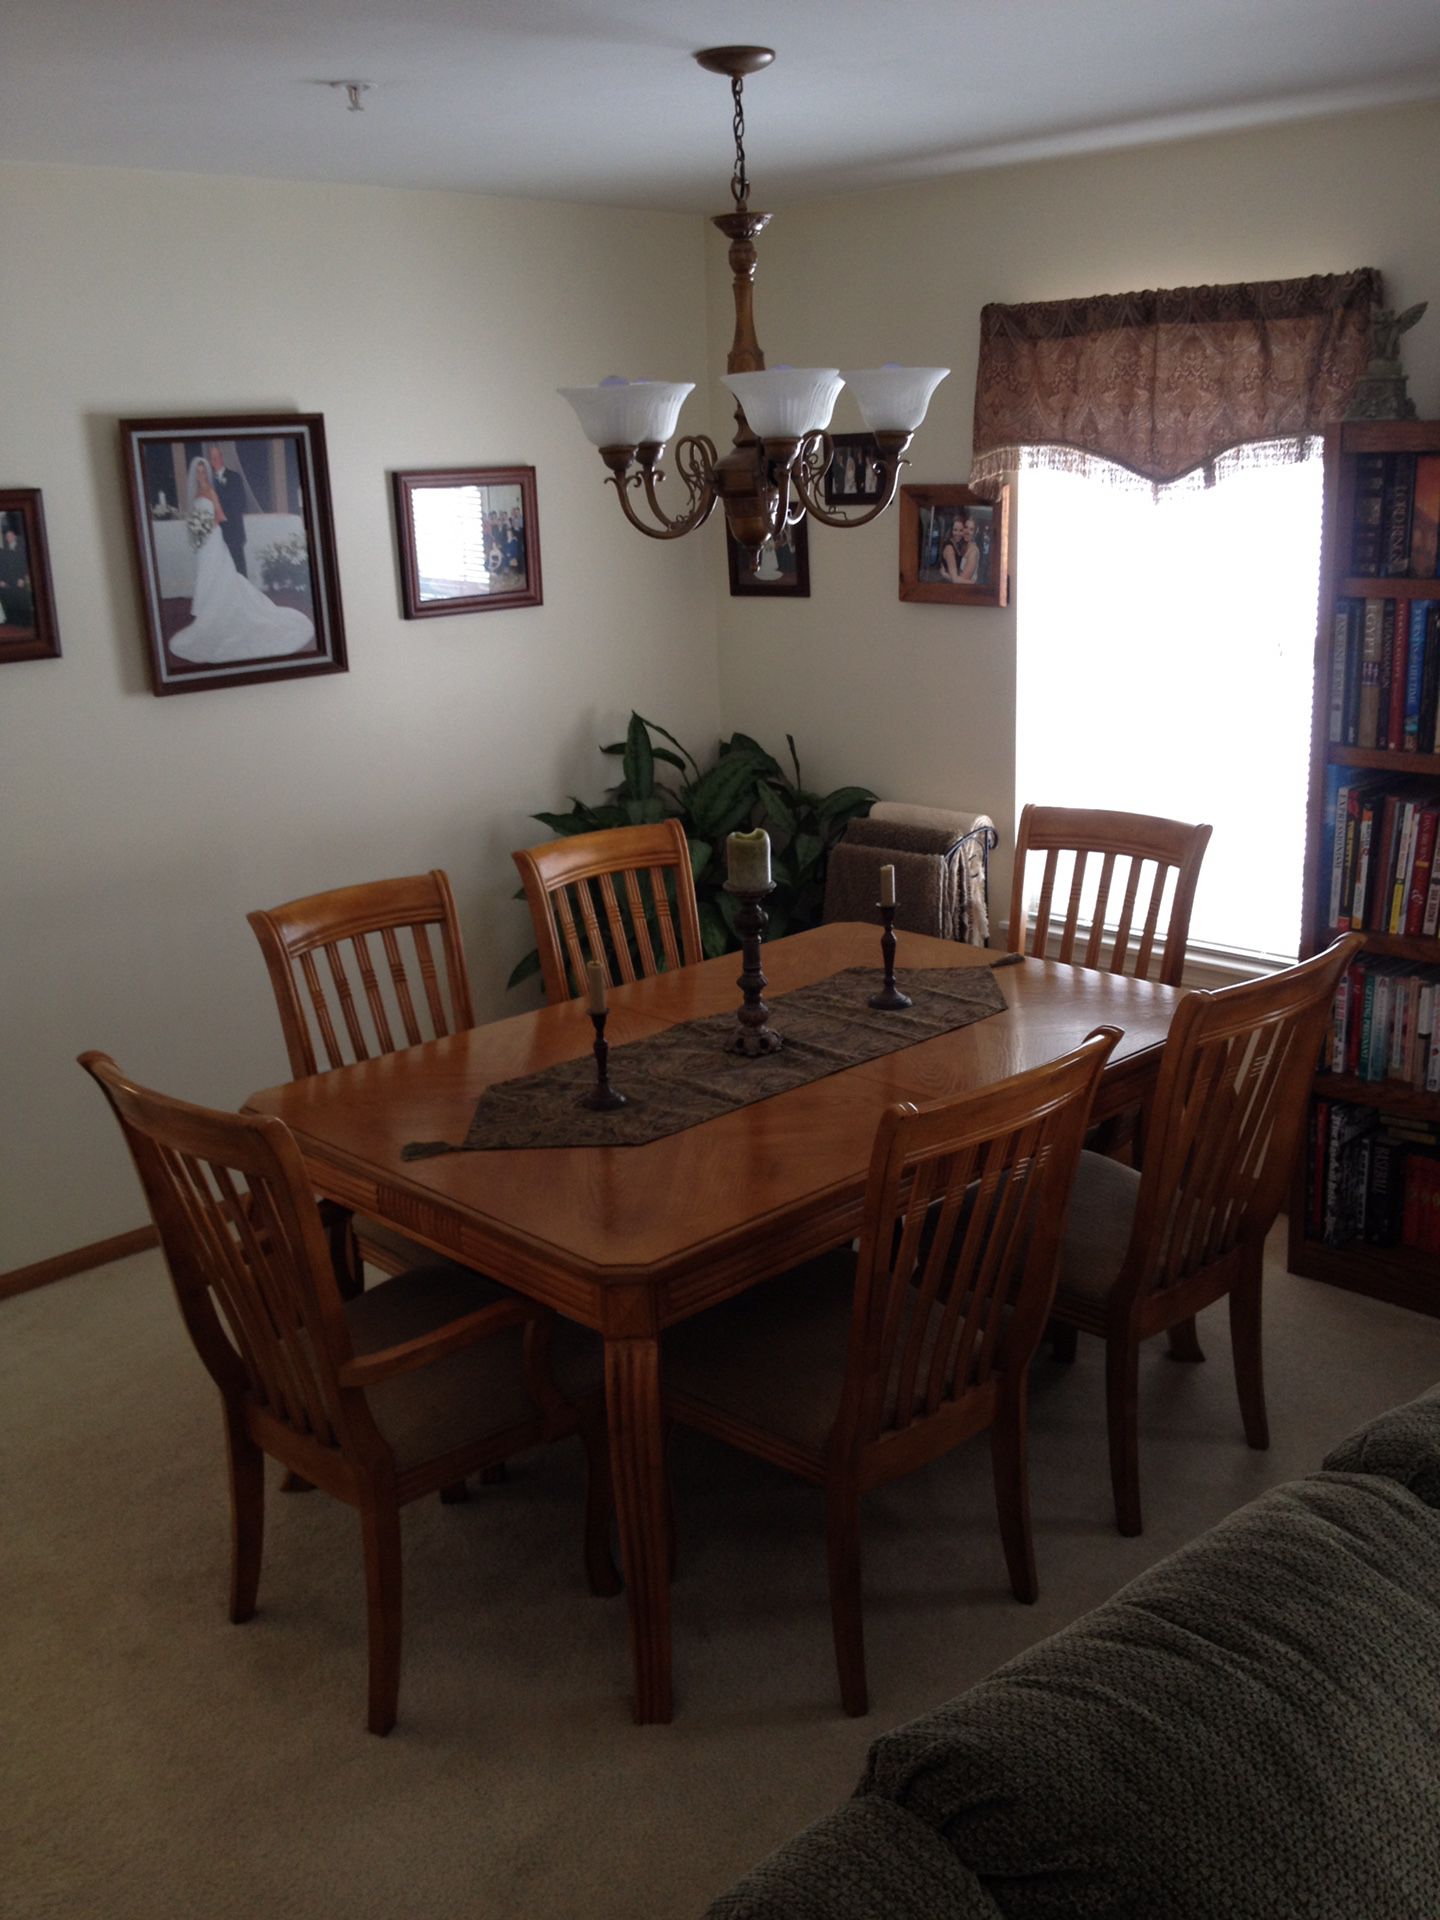 Dining room table with leaf extension